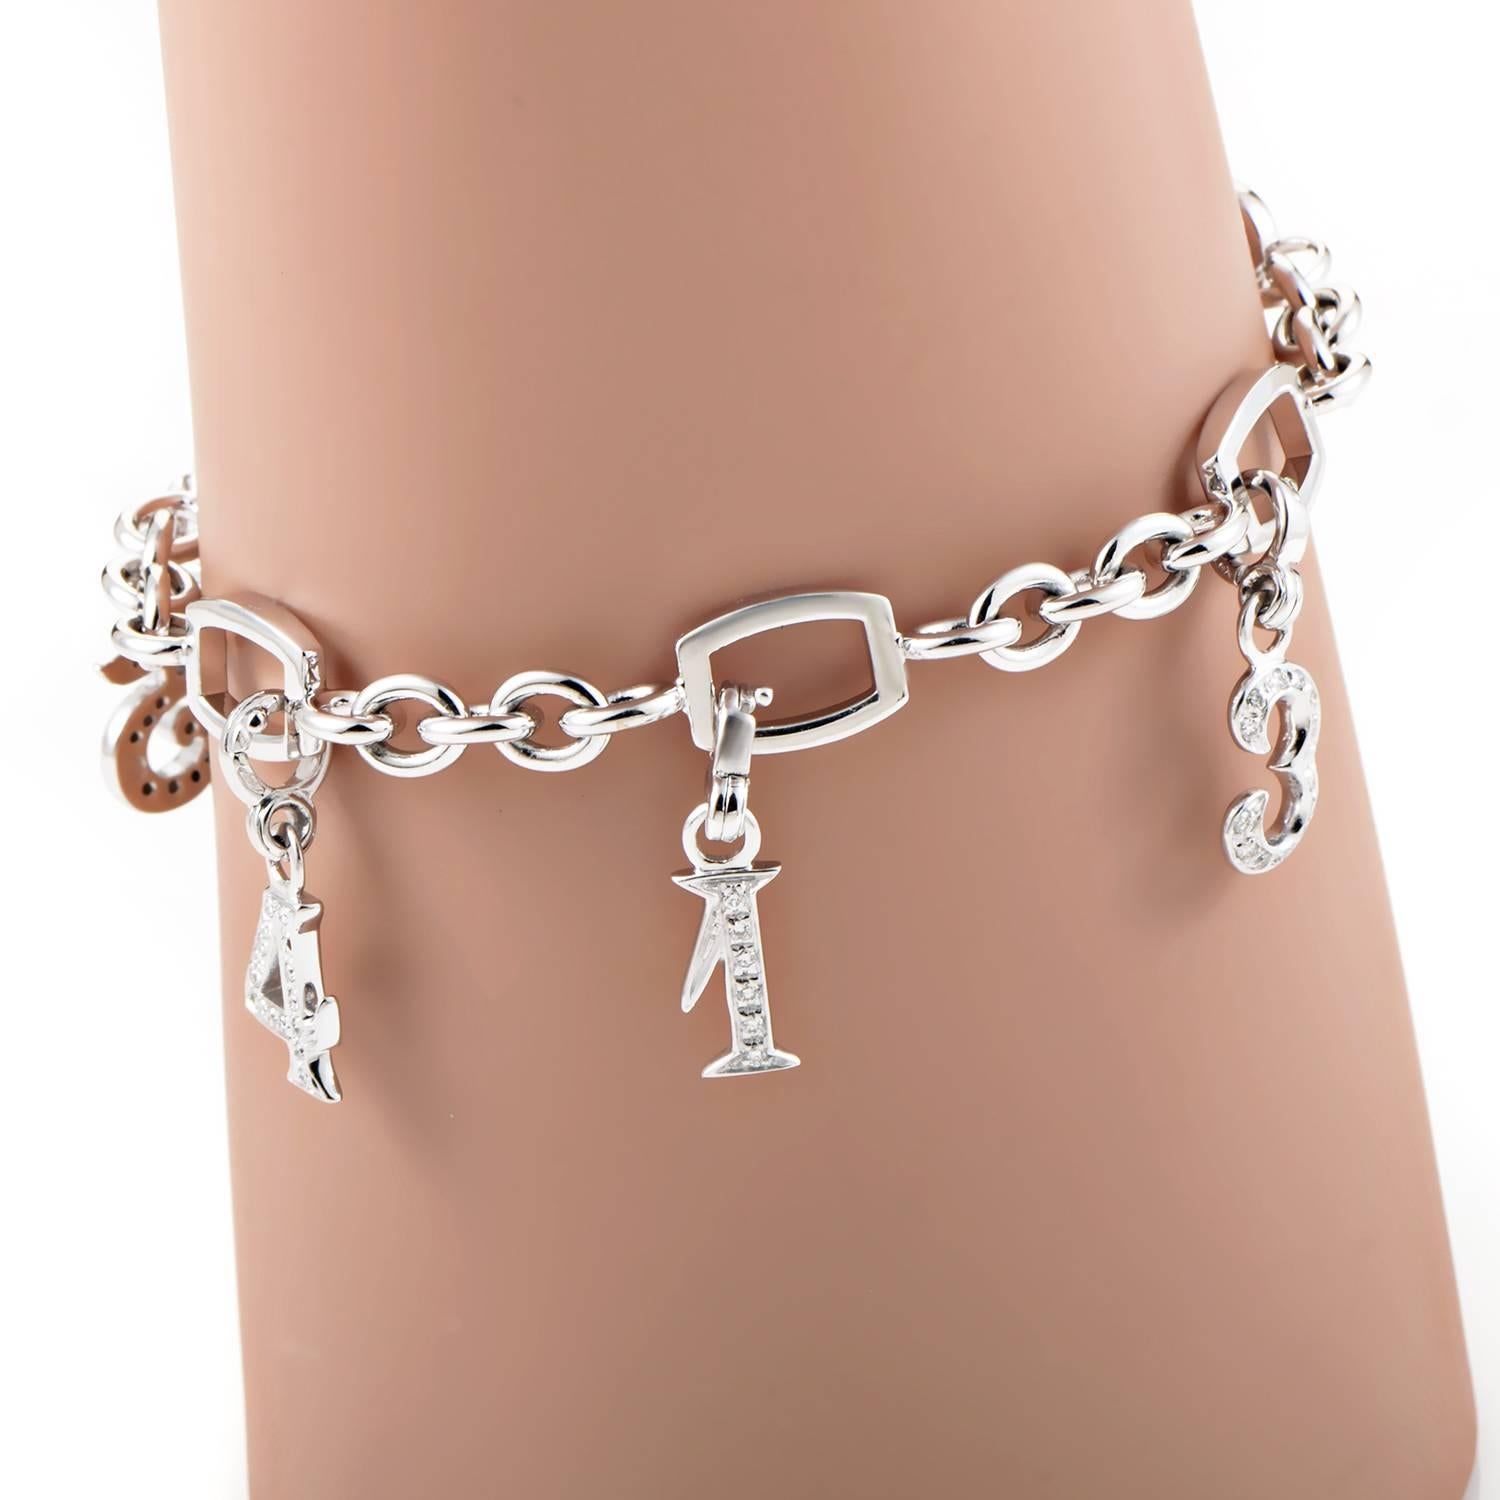 An elegant and feminine design which exudes a luxurious scintillating allure, this splendid bracelet from Franck Muller boasts an interestingly shaped 18K white gold body with lovely number-shaped charms that are embellished with sparkling